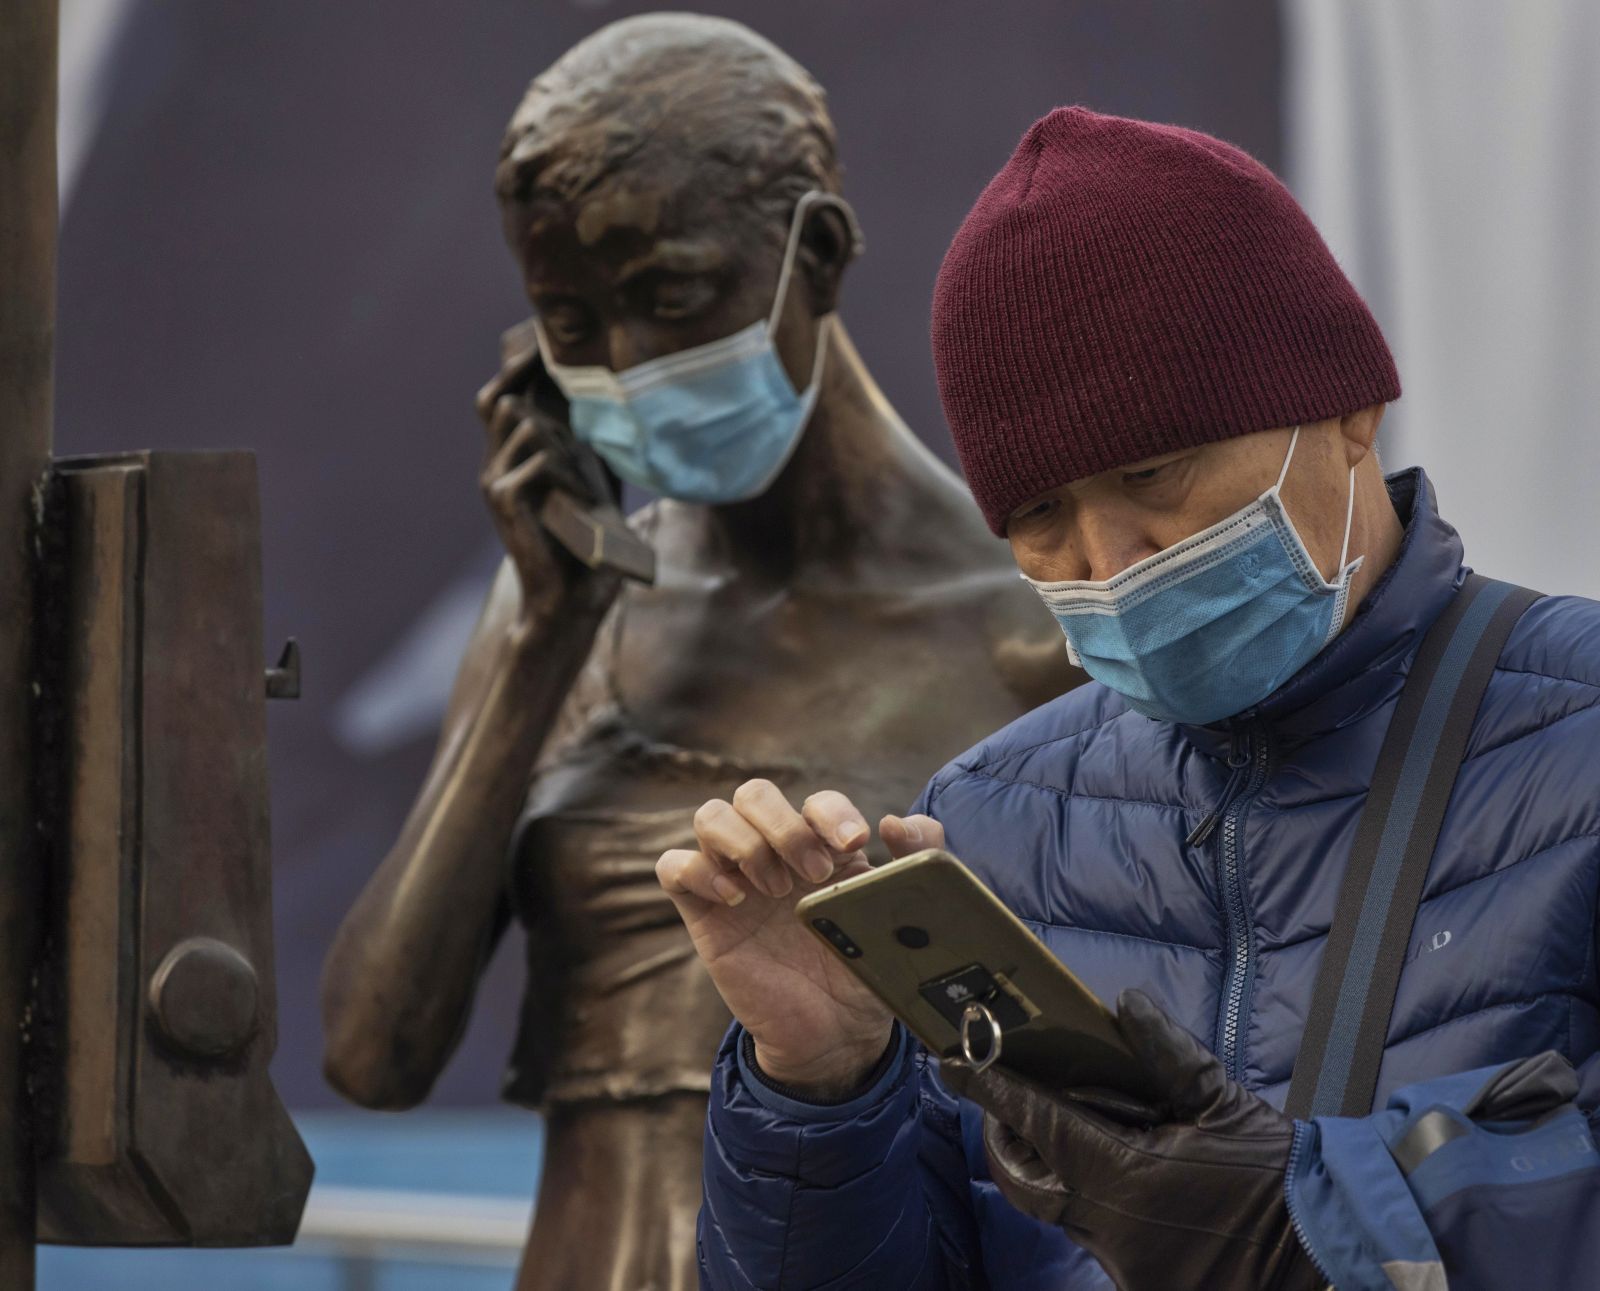 epa08929712 A man uses his phone next to a statue with a mask in Shanghai, China, 10 January 2021. Two Chinese cities near Beijing, Shijiazhuang and Xingtai, are locked down after a spike in Covid-19 cases. Over 300 new cases of the coronavirus disease were confirmed in Hebei province this week, according to the National Health Commission of China.  EPA/ALEX PLAVEVSKI